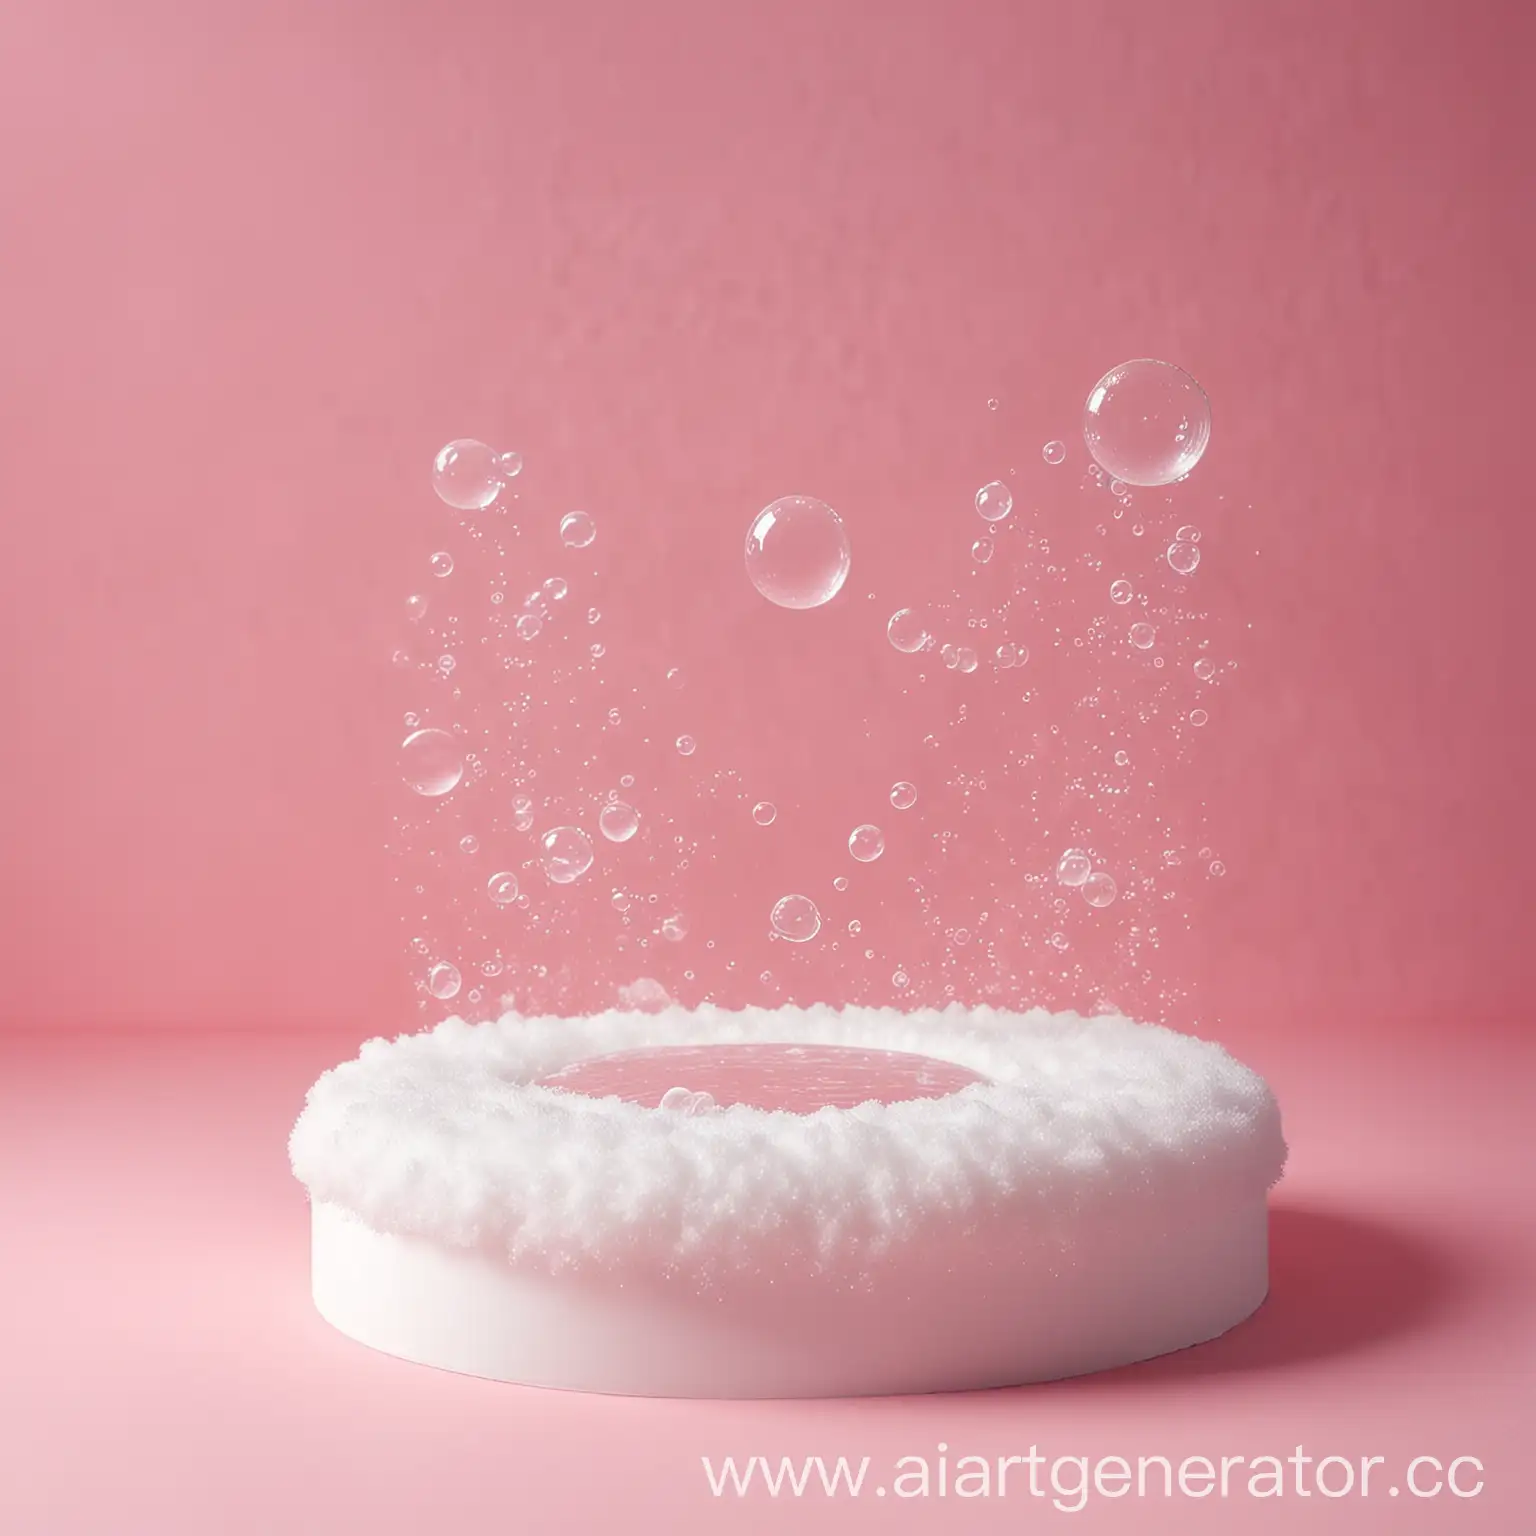 Foamy-Podium-on-Delicate-Pink-Background-with-Soap-Bubbles